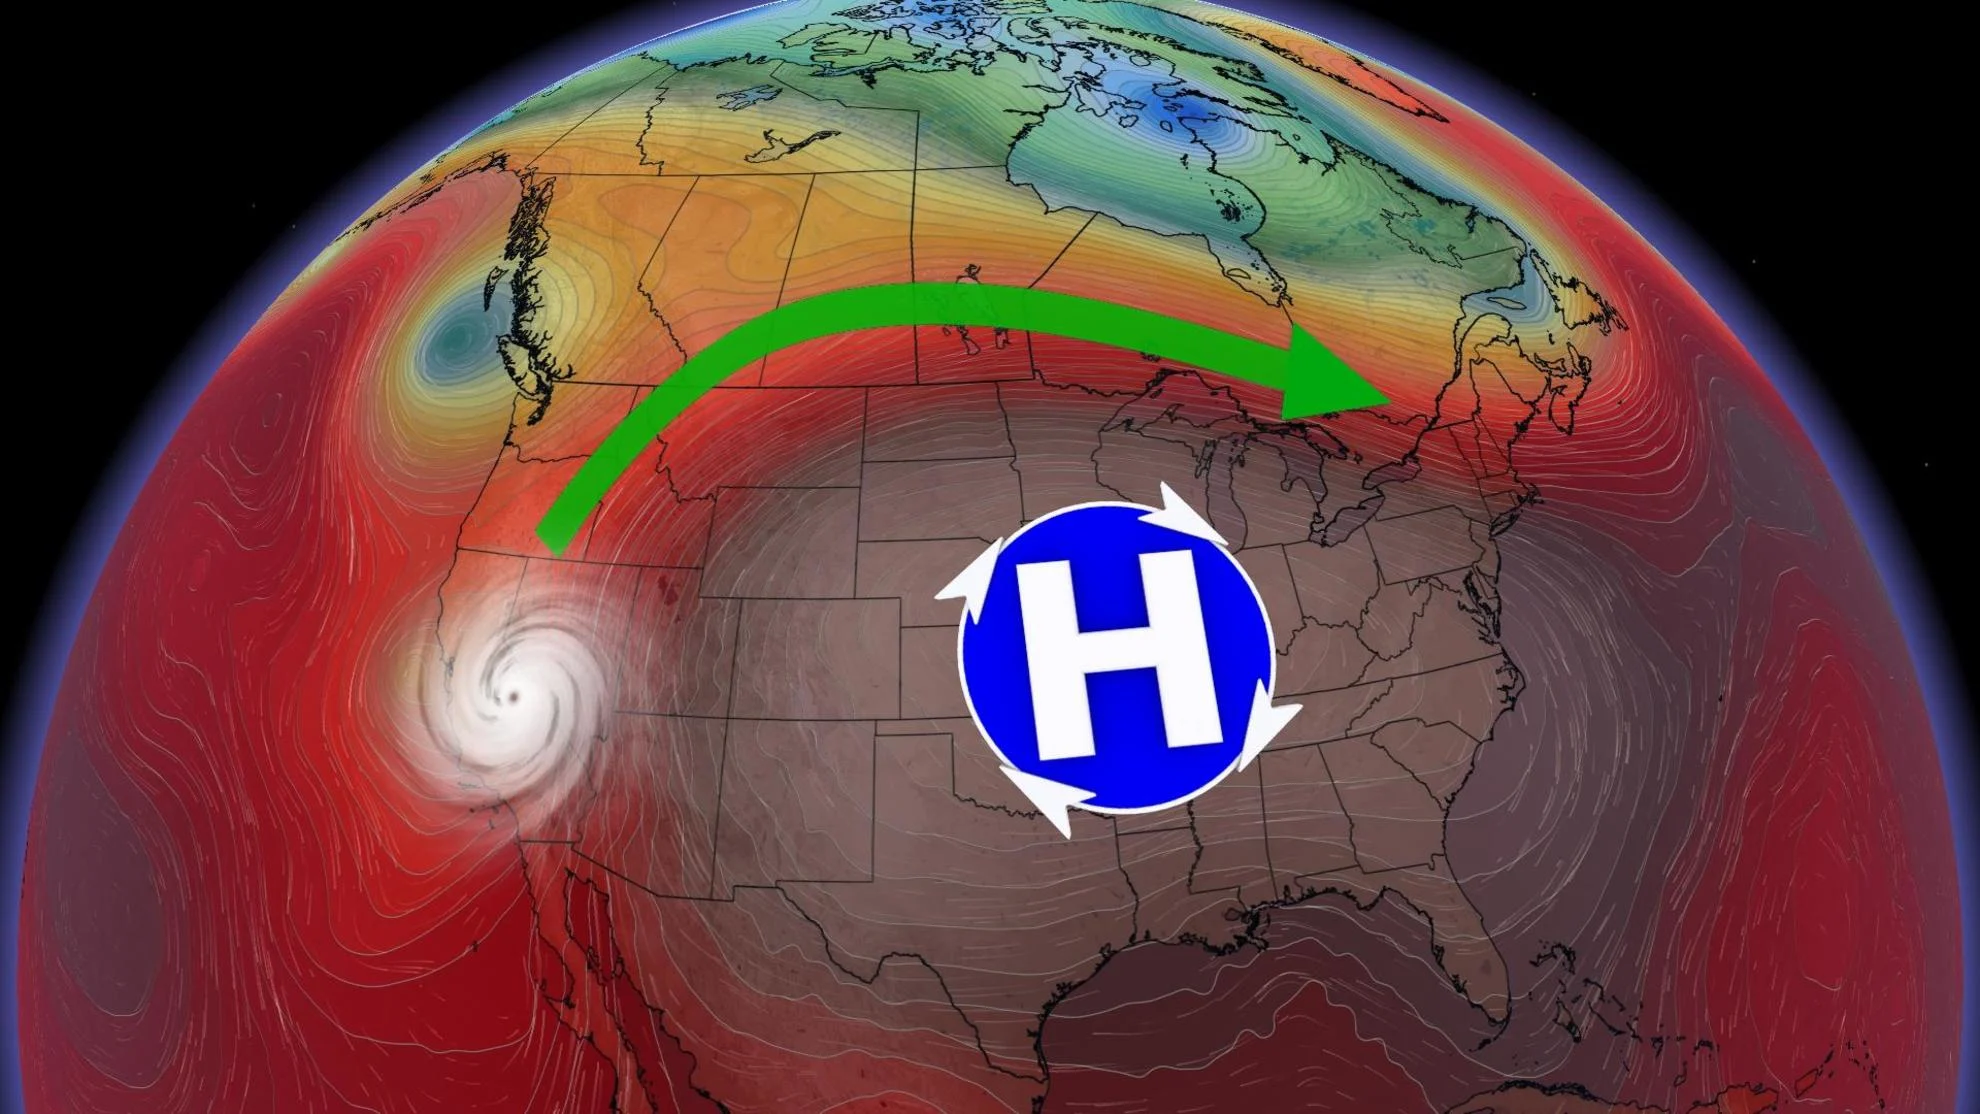 U.S. heat dome drives extreme and rare weather from Mexico to Canada